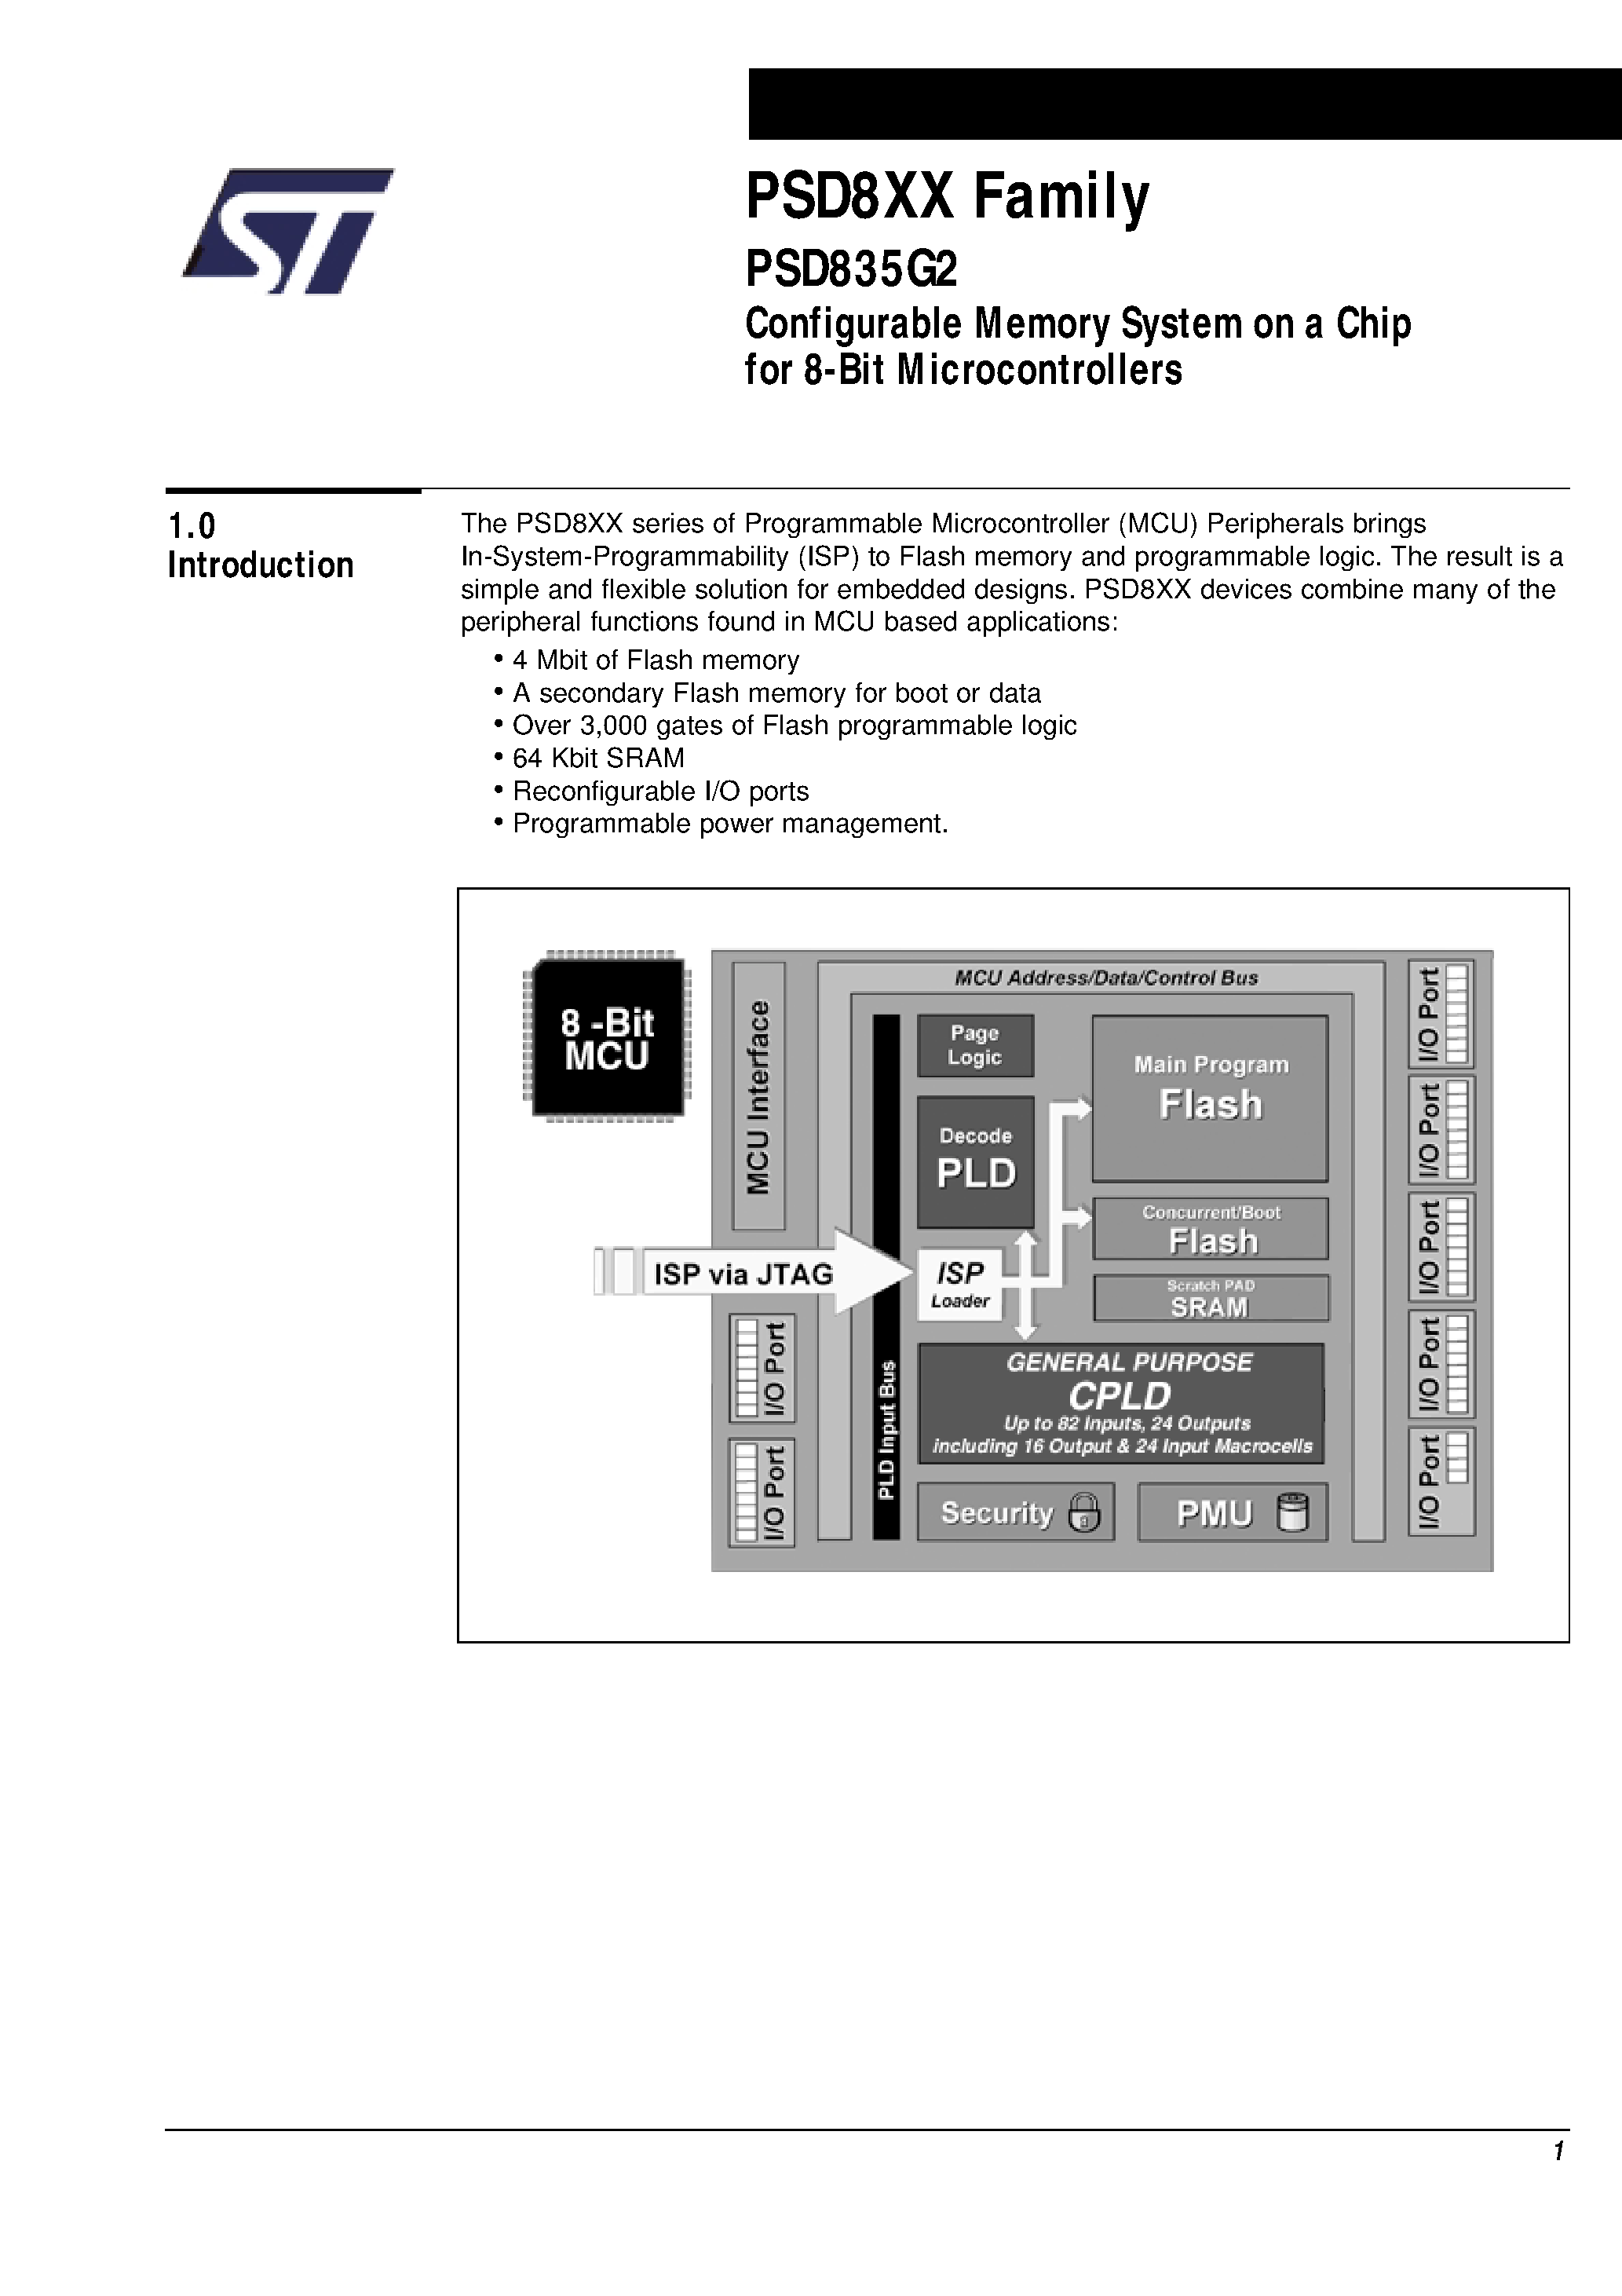 Datasheet PSD835F1-A-15U - Configurable Memory System on a Chip for 8-Bit Microcontrollers page 2